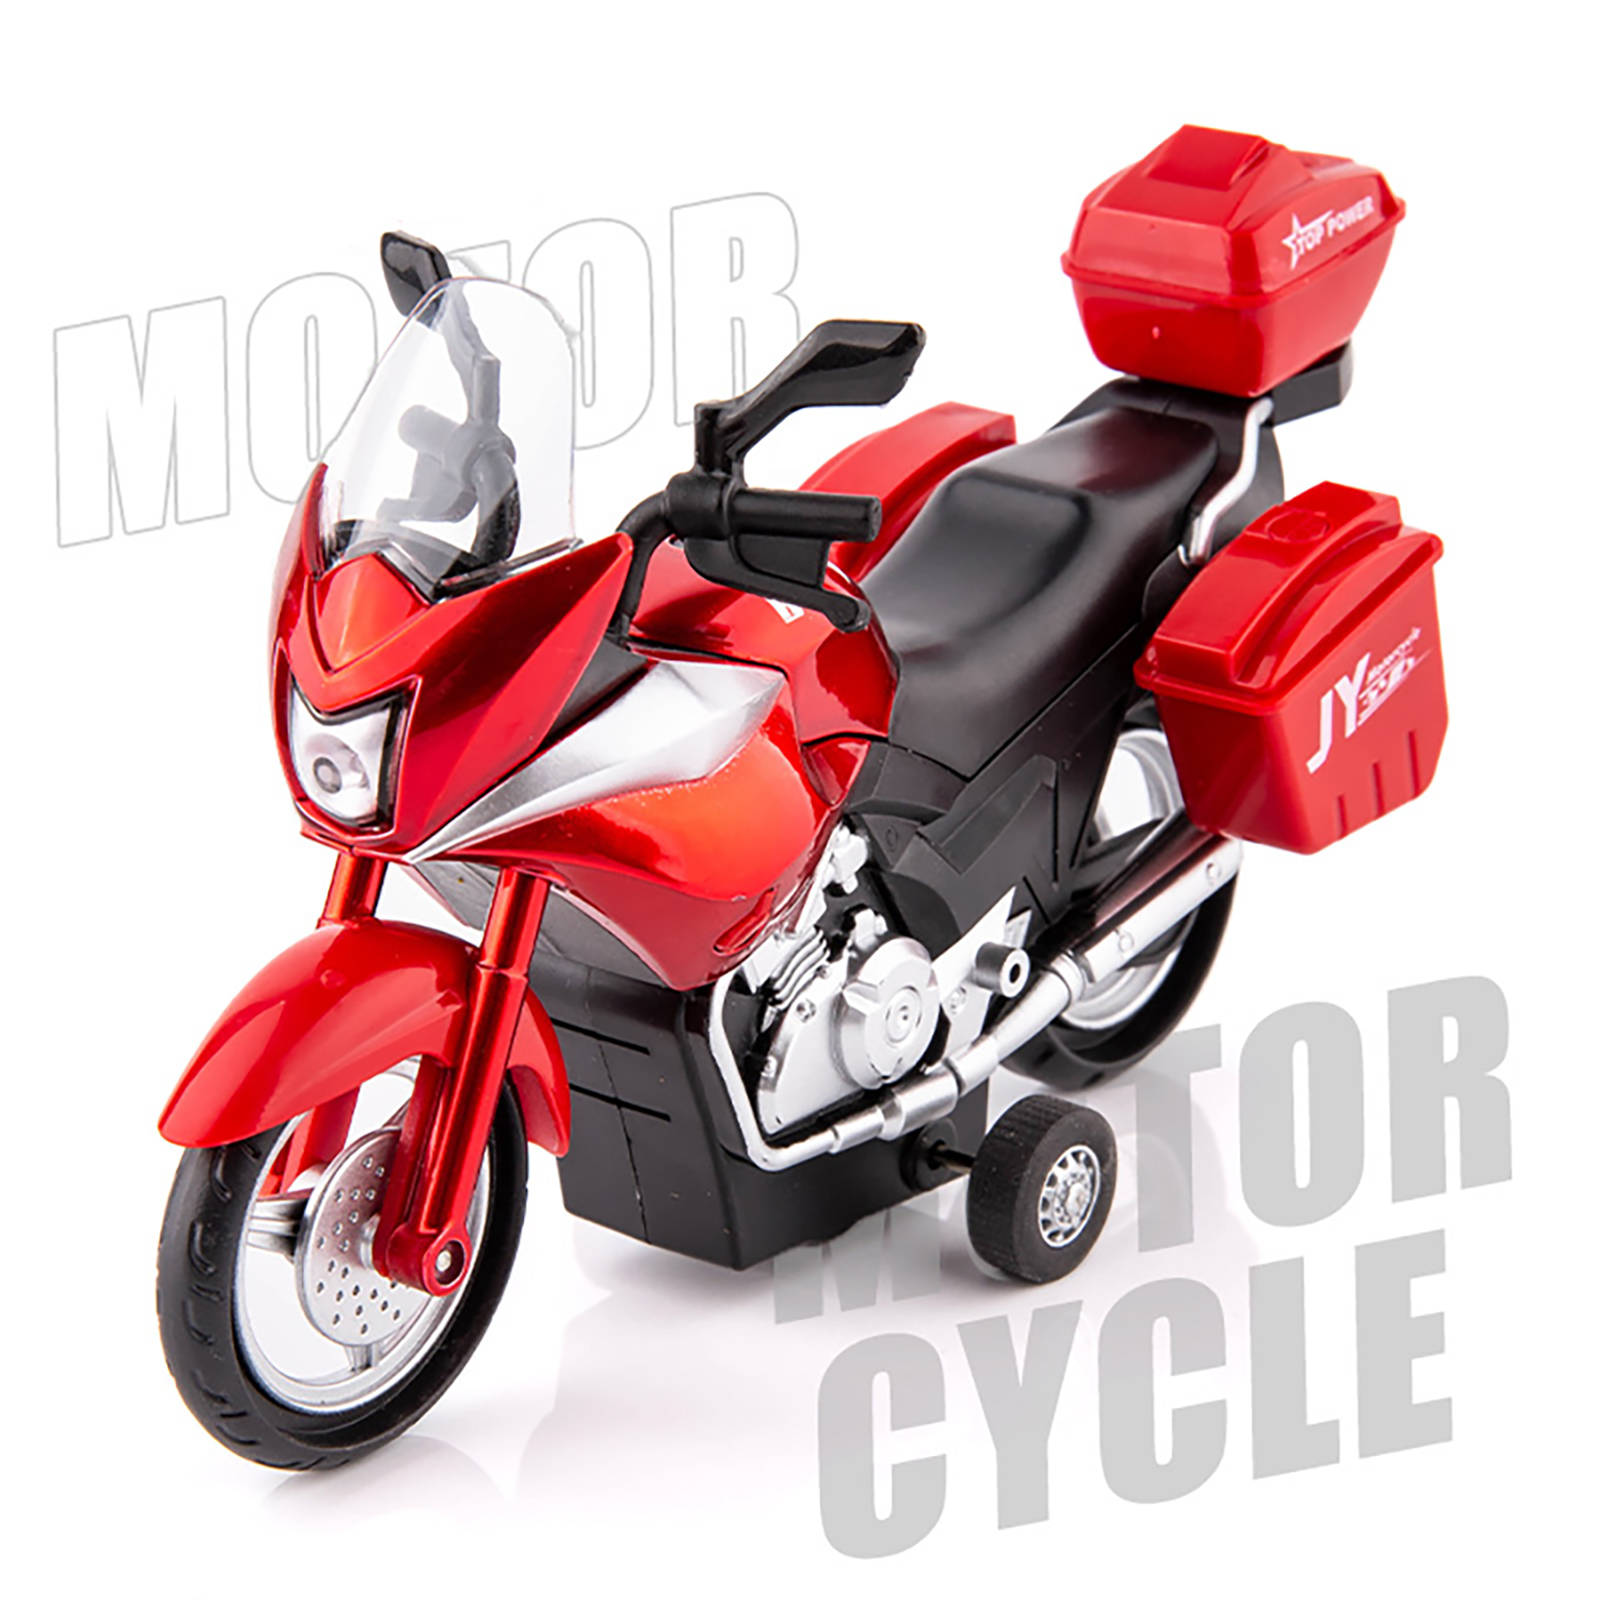 1:14 Alloy Motorcycle Model Simulation Pull-back Diecast Motorcycle With Figure Doll For Boys Birthday Christmas Gifts Home Decor VB32513